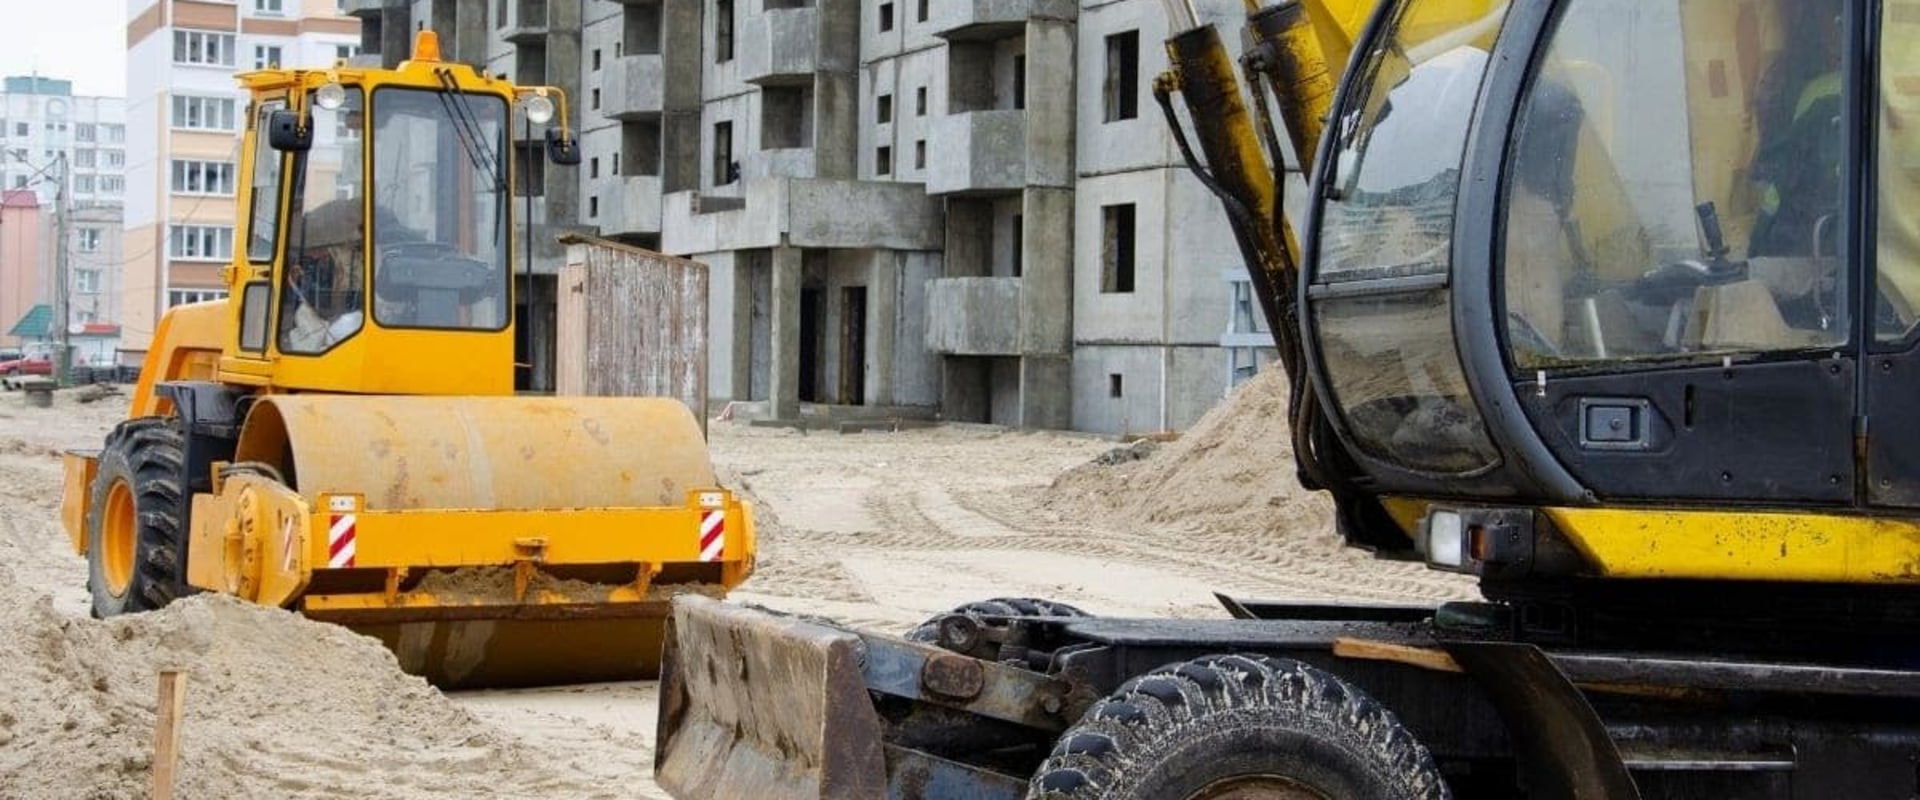 The Advantages of Renting vs Buying Construction Equipment